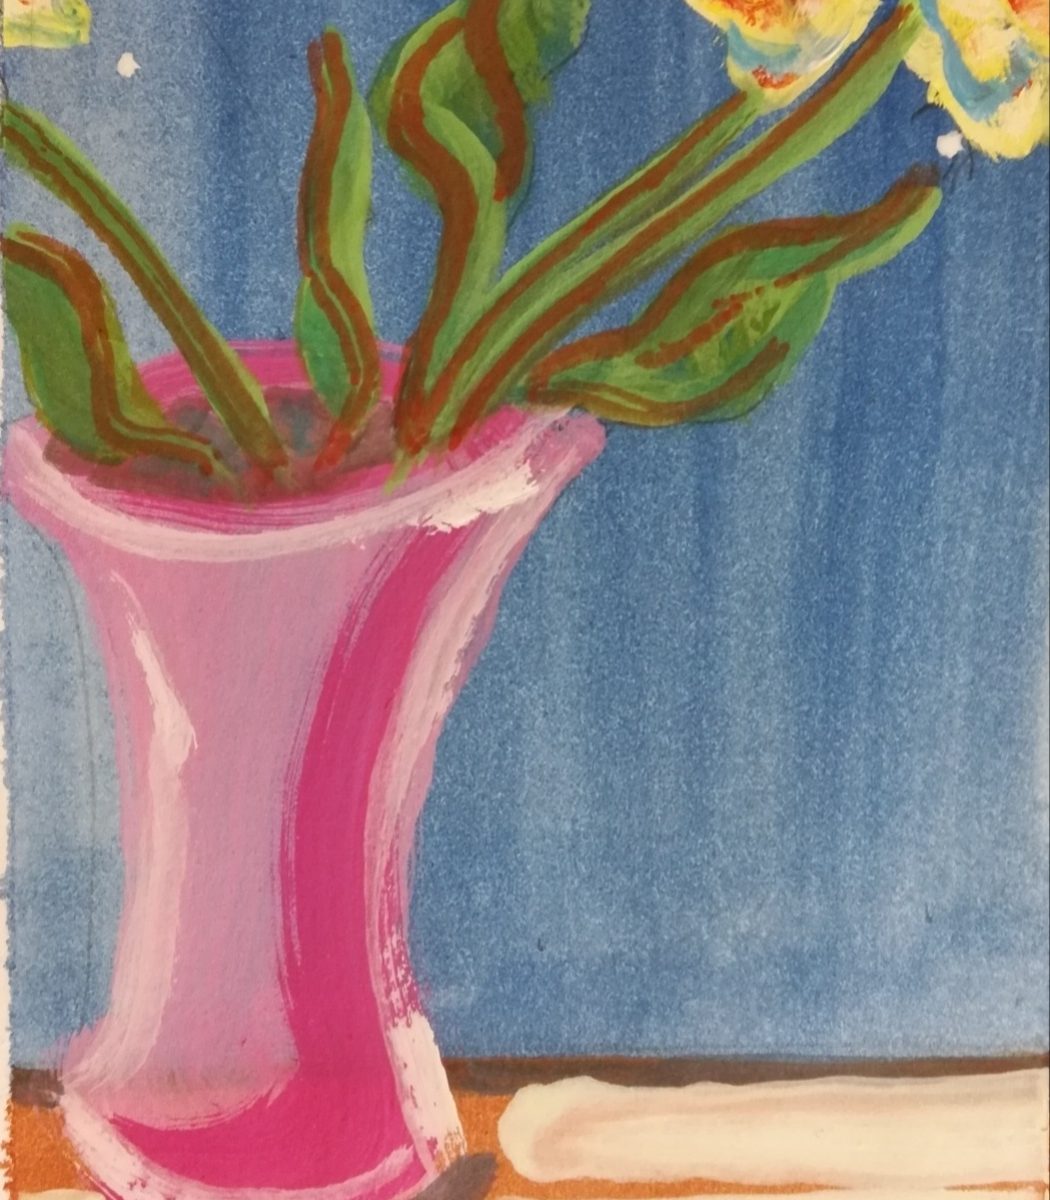 three yellow white blue flowers in a pink vase awkwardly compressed by the hard edges of the paper